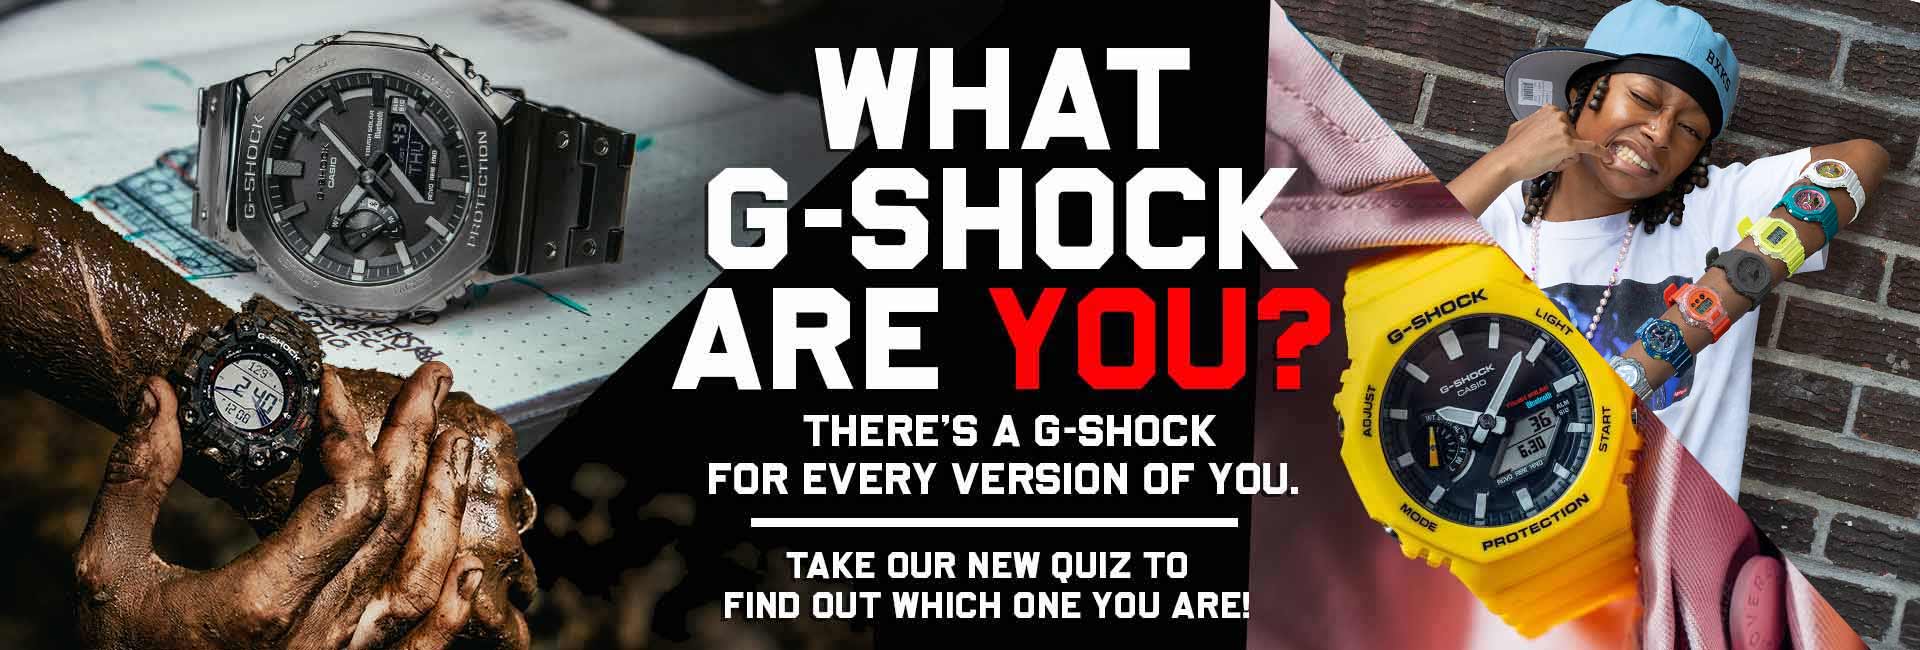 G-SHOCK QUIZ | WHAT G-SHOCK ARE YOU?